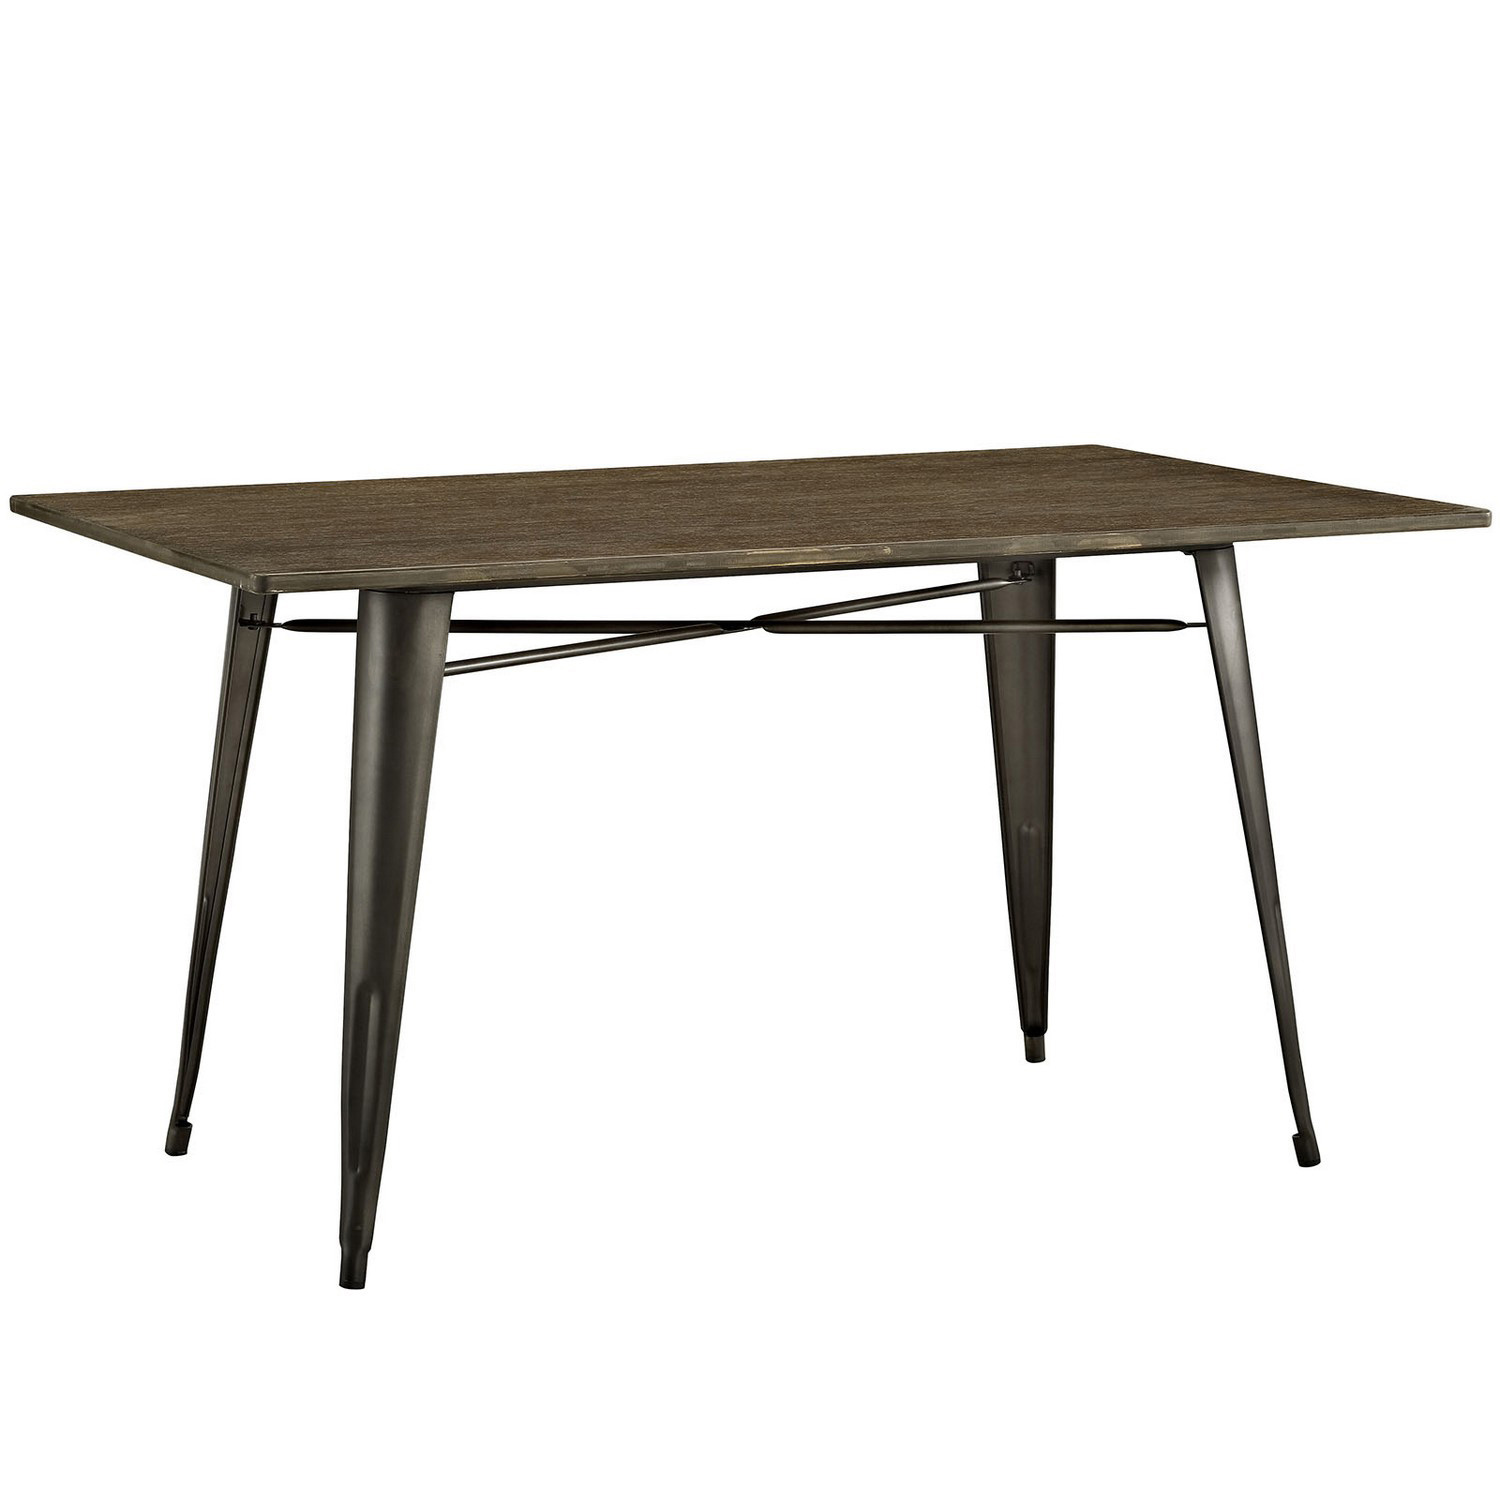 Modway Alacrity 59-inch Rectangle Wood Dining Table - Brown